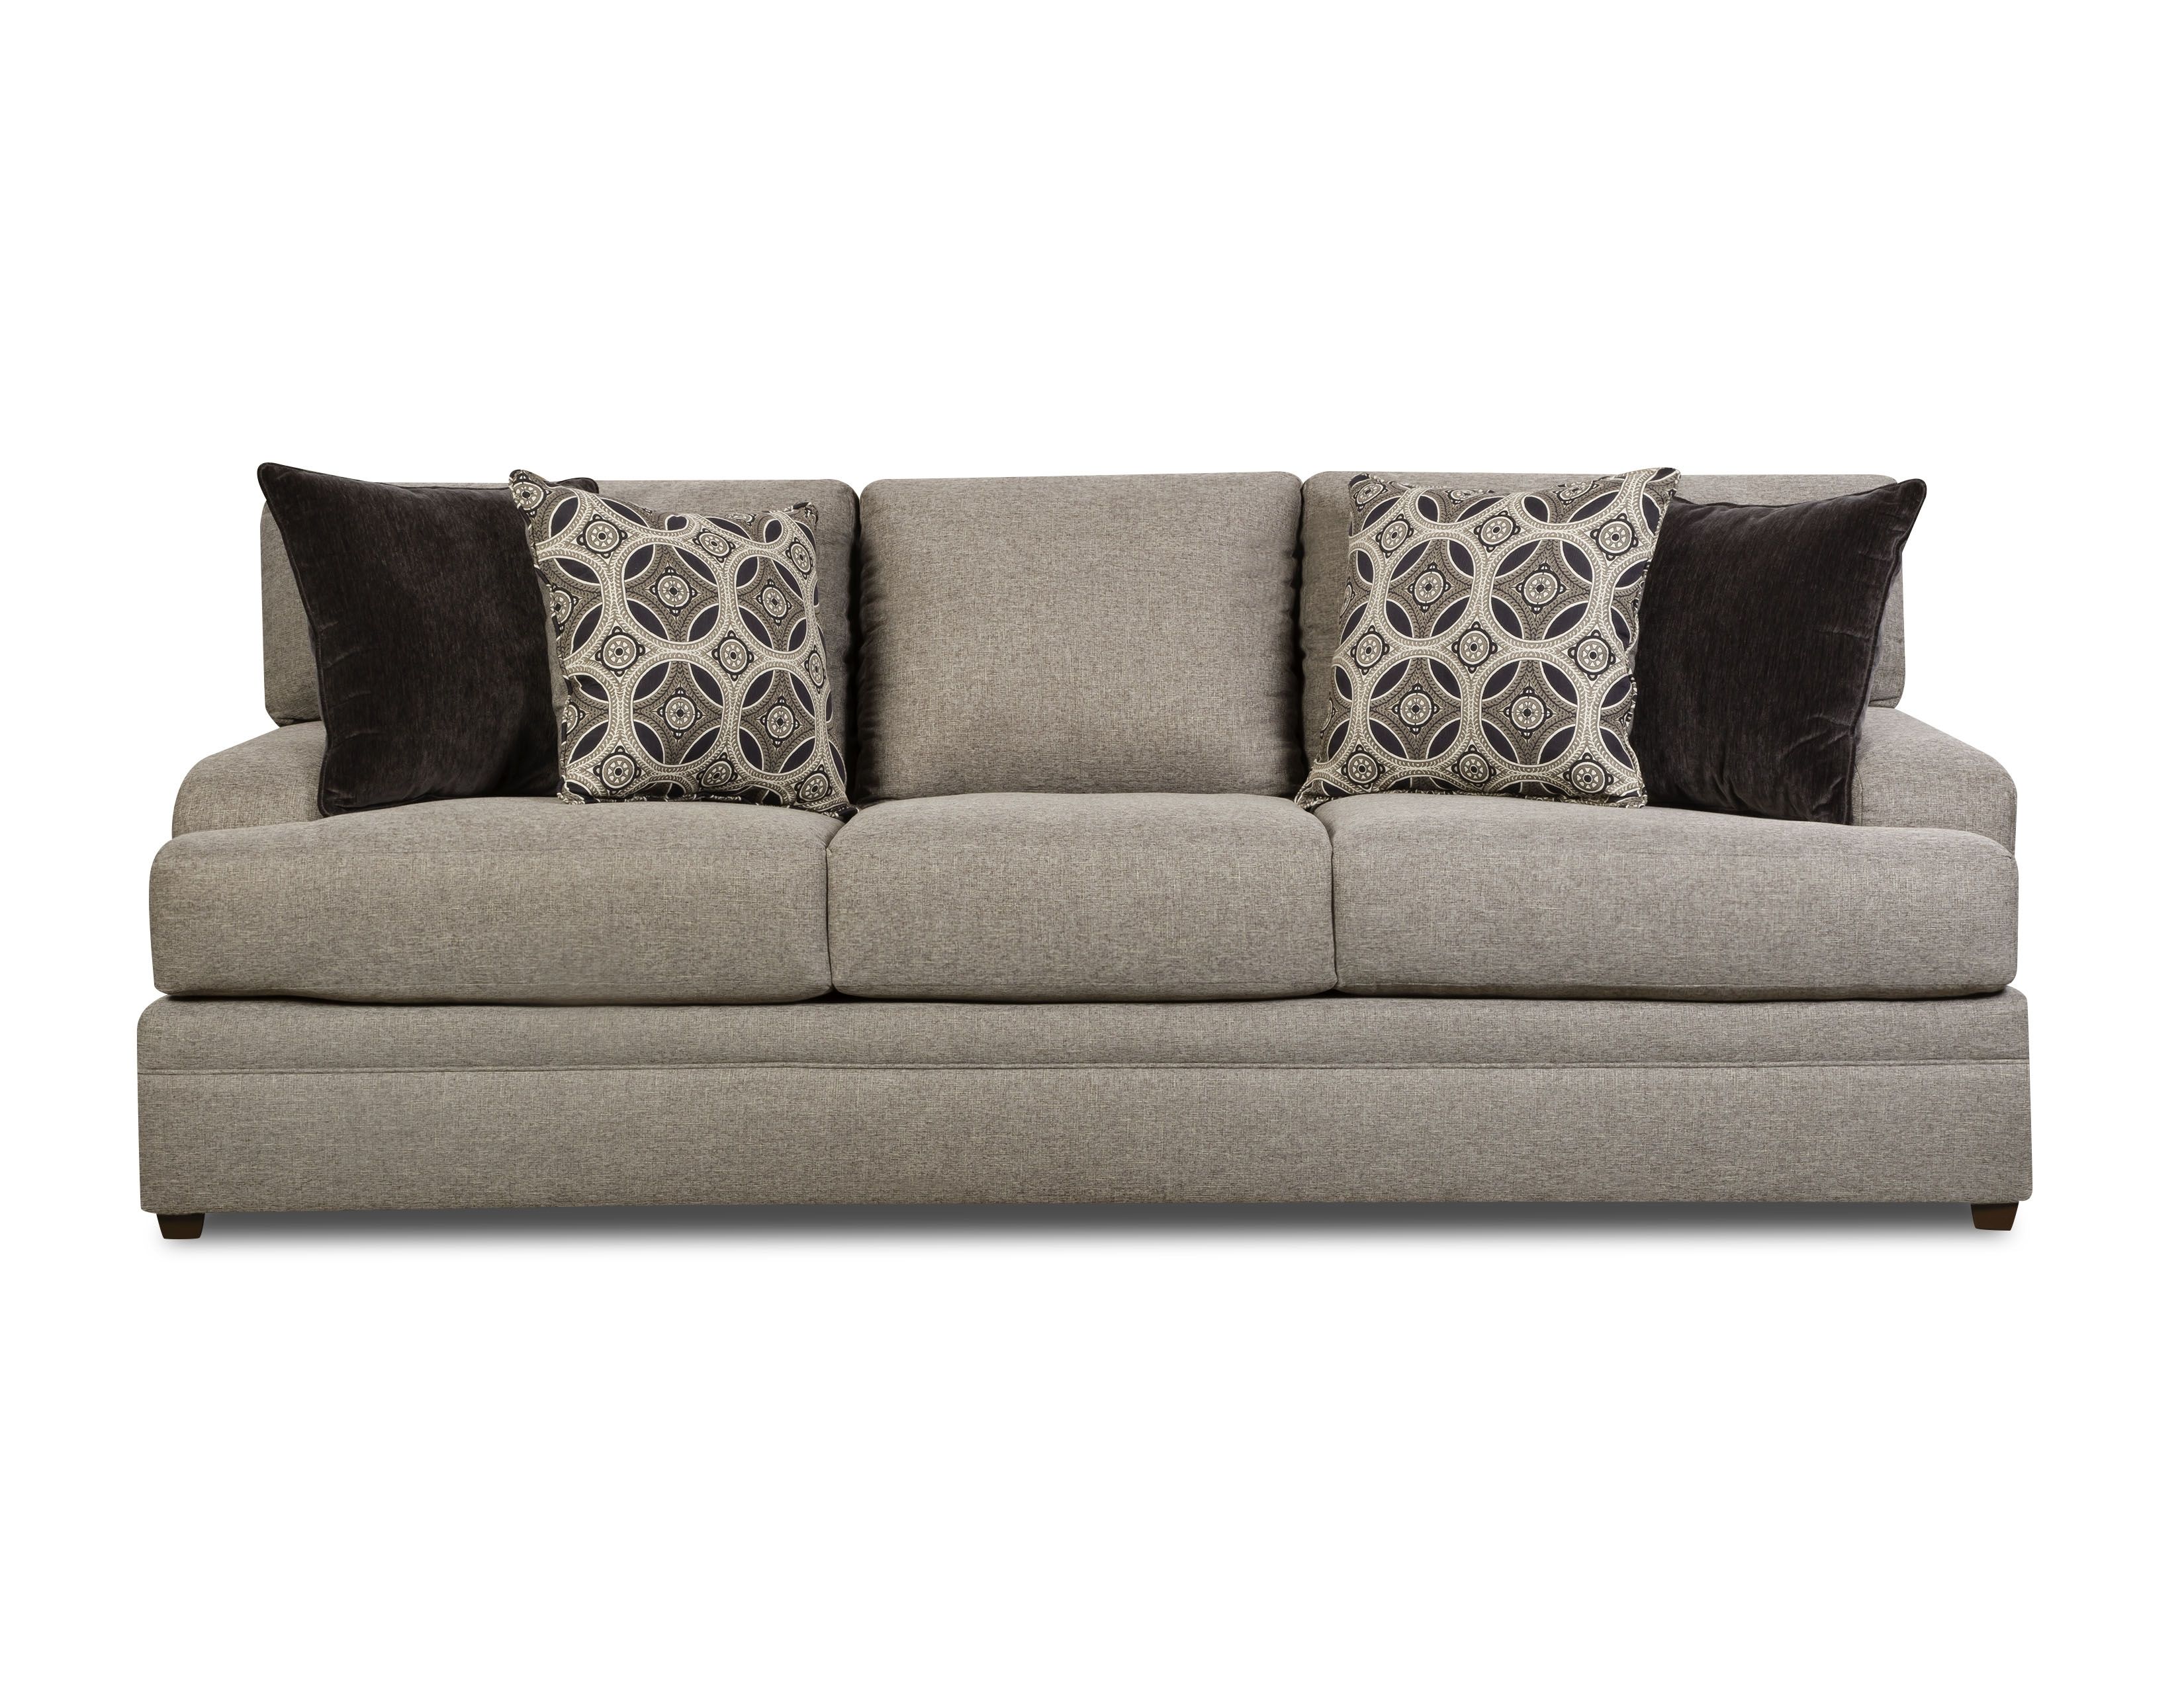 Sofa At Sears 89 With Sofa At Sears – Fjellkjeden For Sears Sofas (Photo 5 of 10)